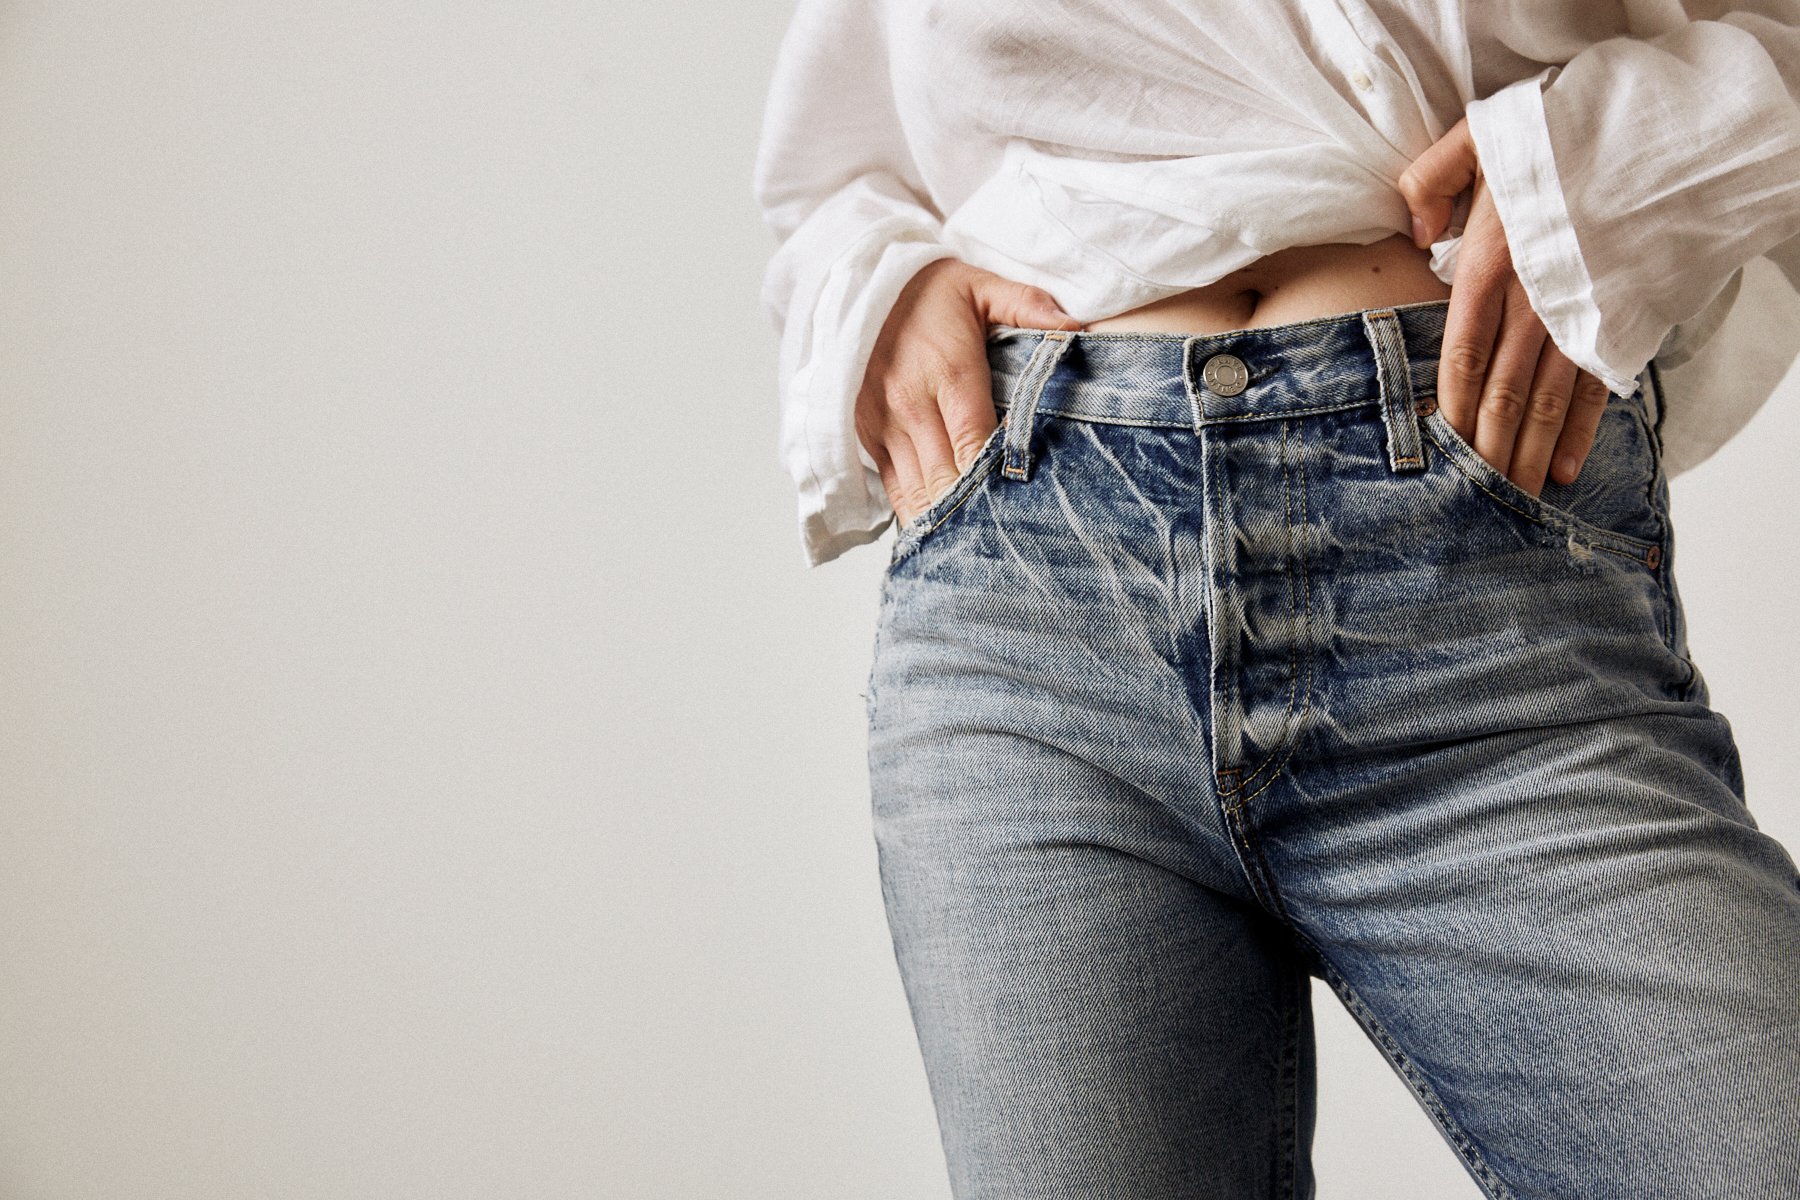 TRAVE Denim – New Jeans Brand For 2019 - THE JEANS BLOG